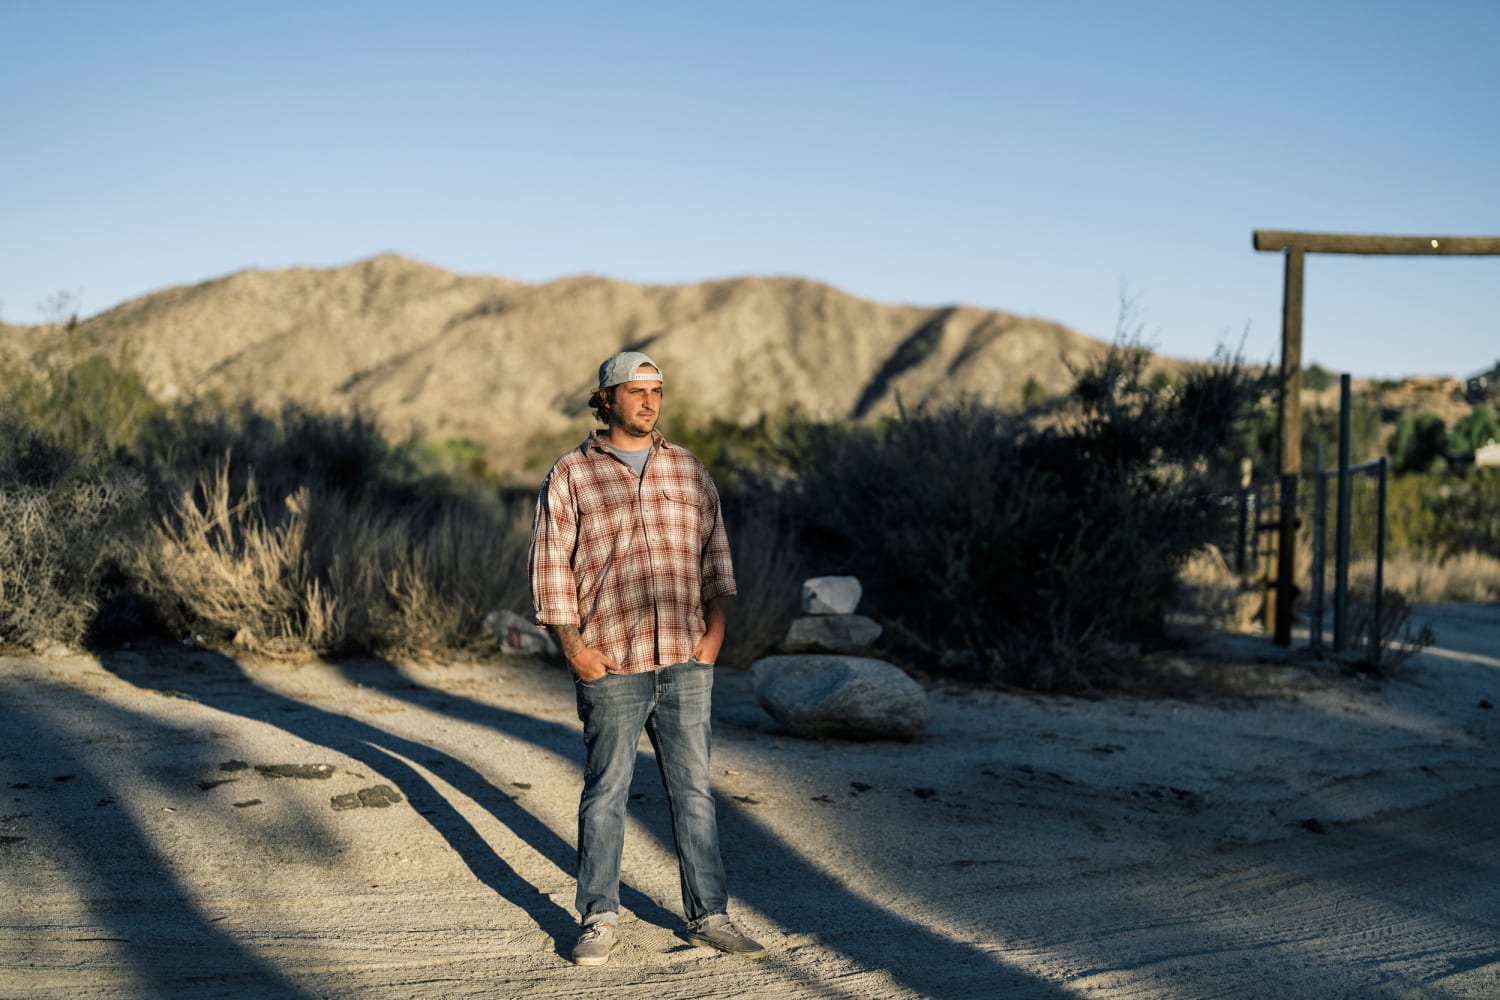 ‘Go back to L.A.’: Urban transplants threaten to price out locals in Southern California desert